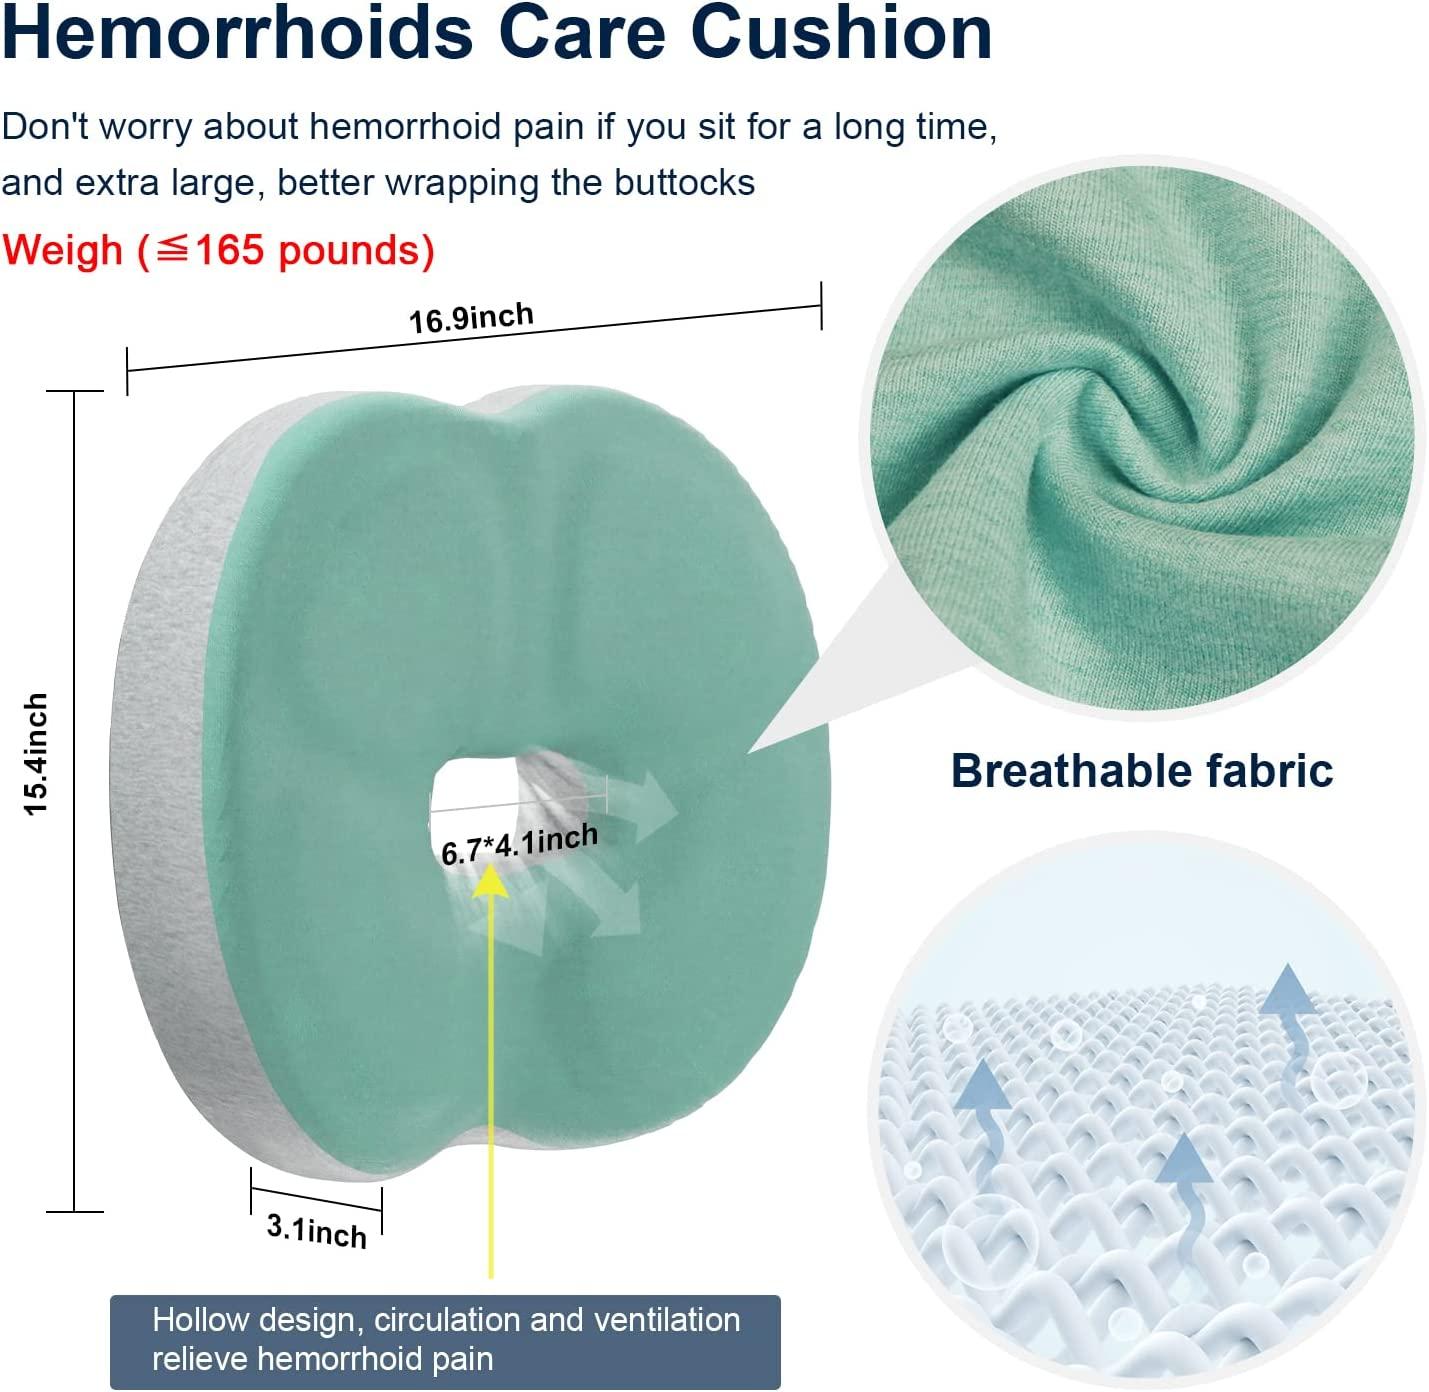 Donut cushion benefits and effective uses for hemorrhoid pillows 2017.